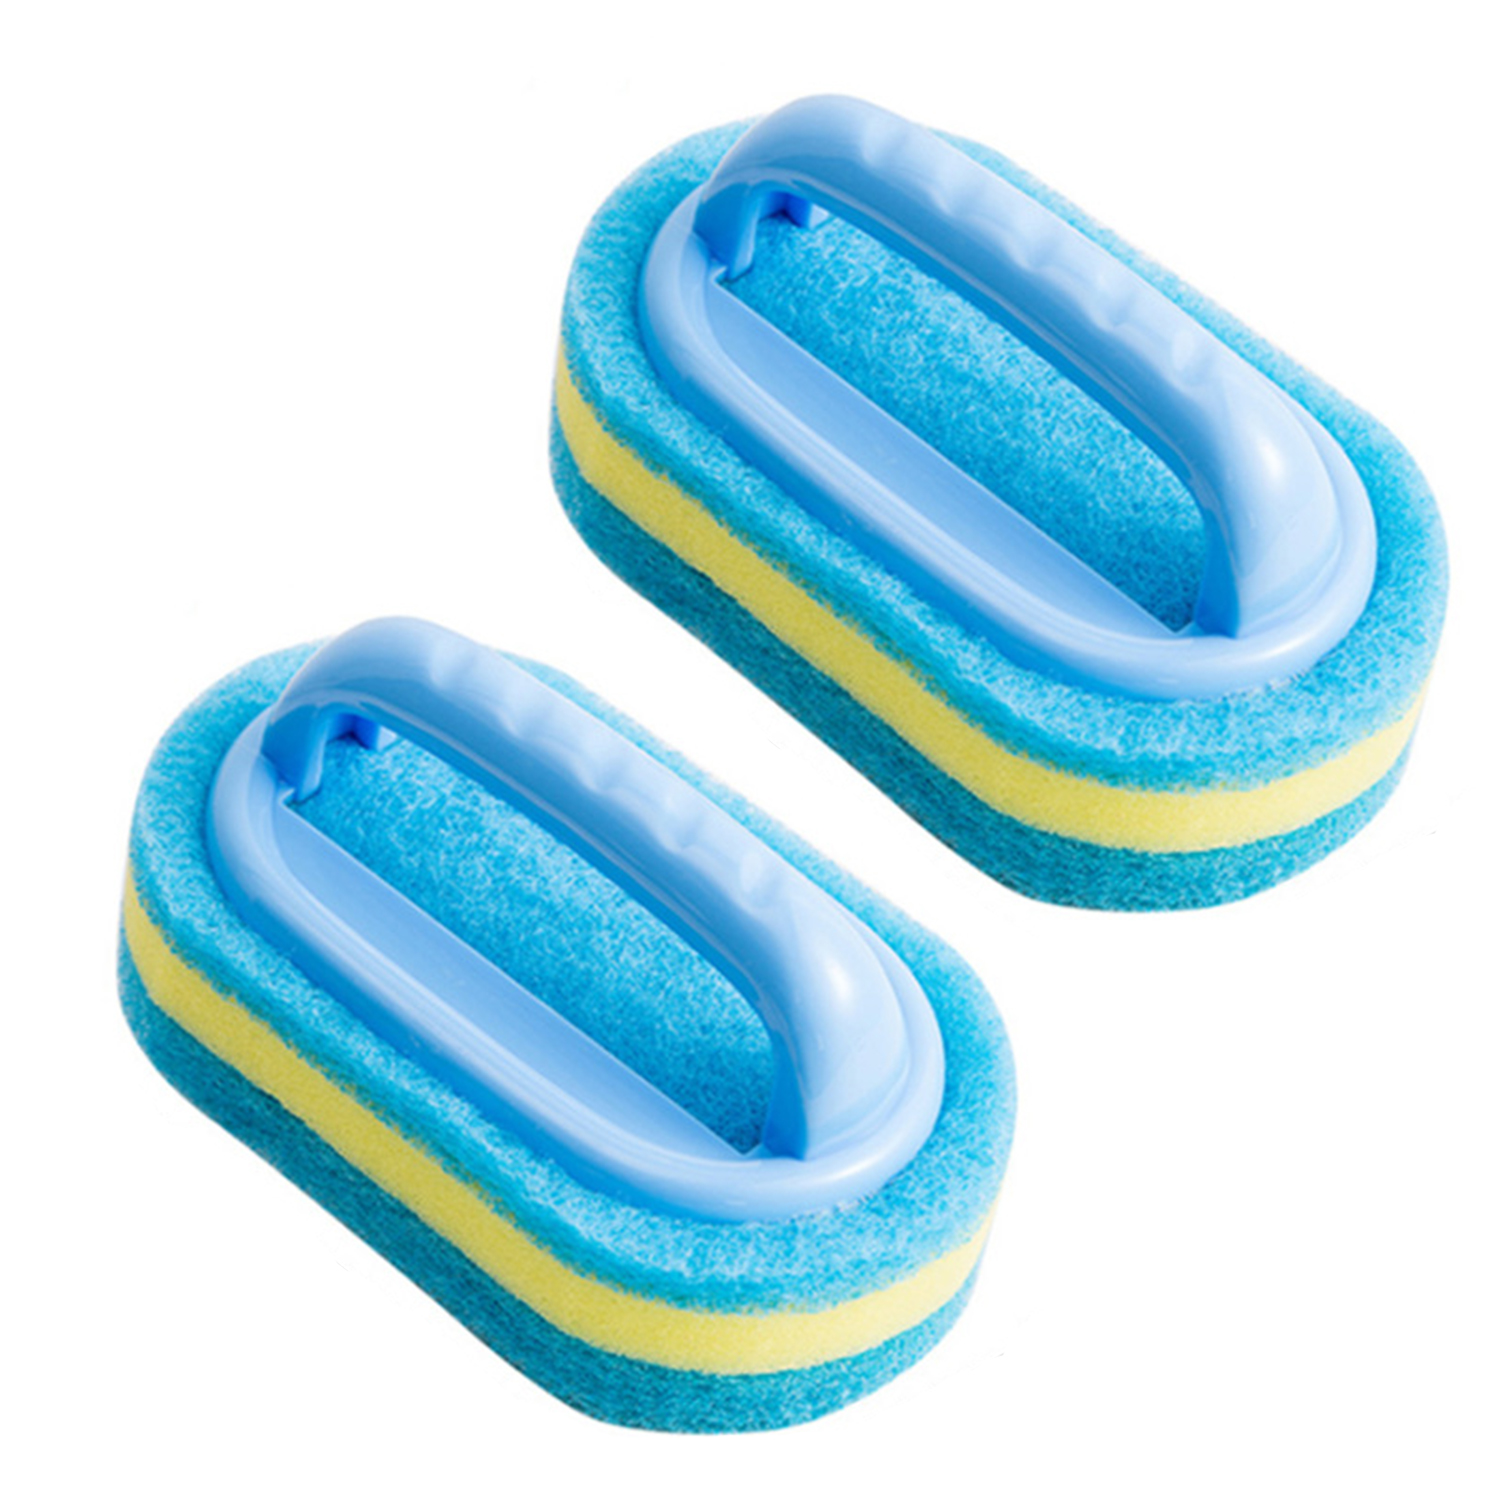 Pack of Cleaning Sponges with Handle - Abrasive Pads, Cleaning